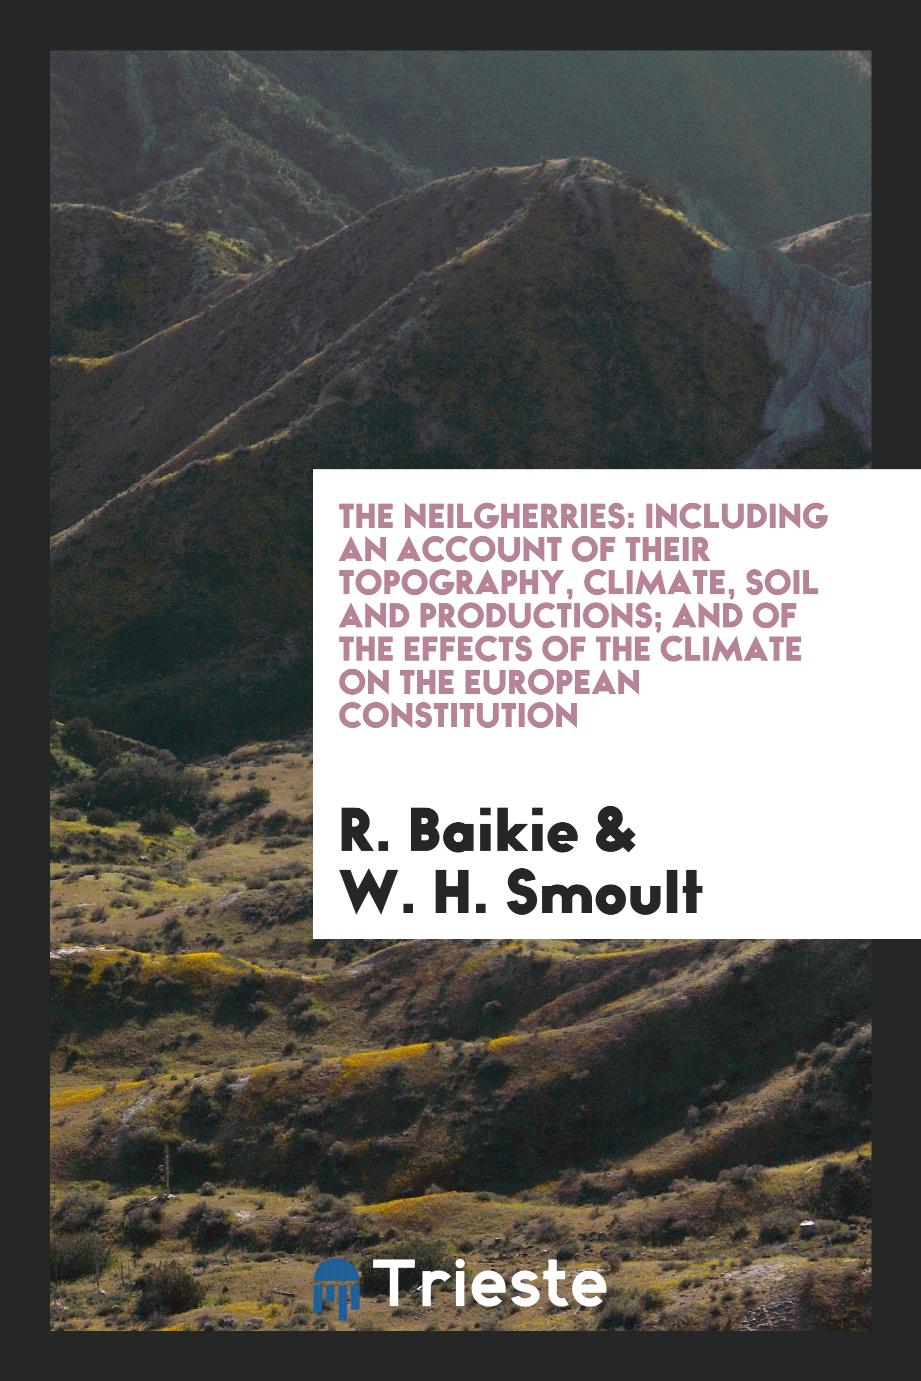 The Neilgherries: including an account of their topography, climate, soil and productions; and of the effects of the climate on the European constitution